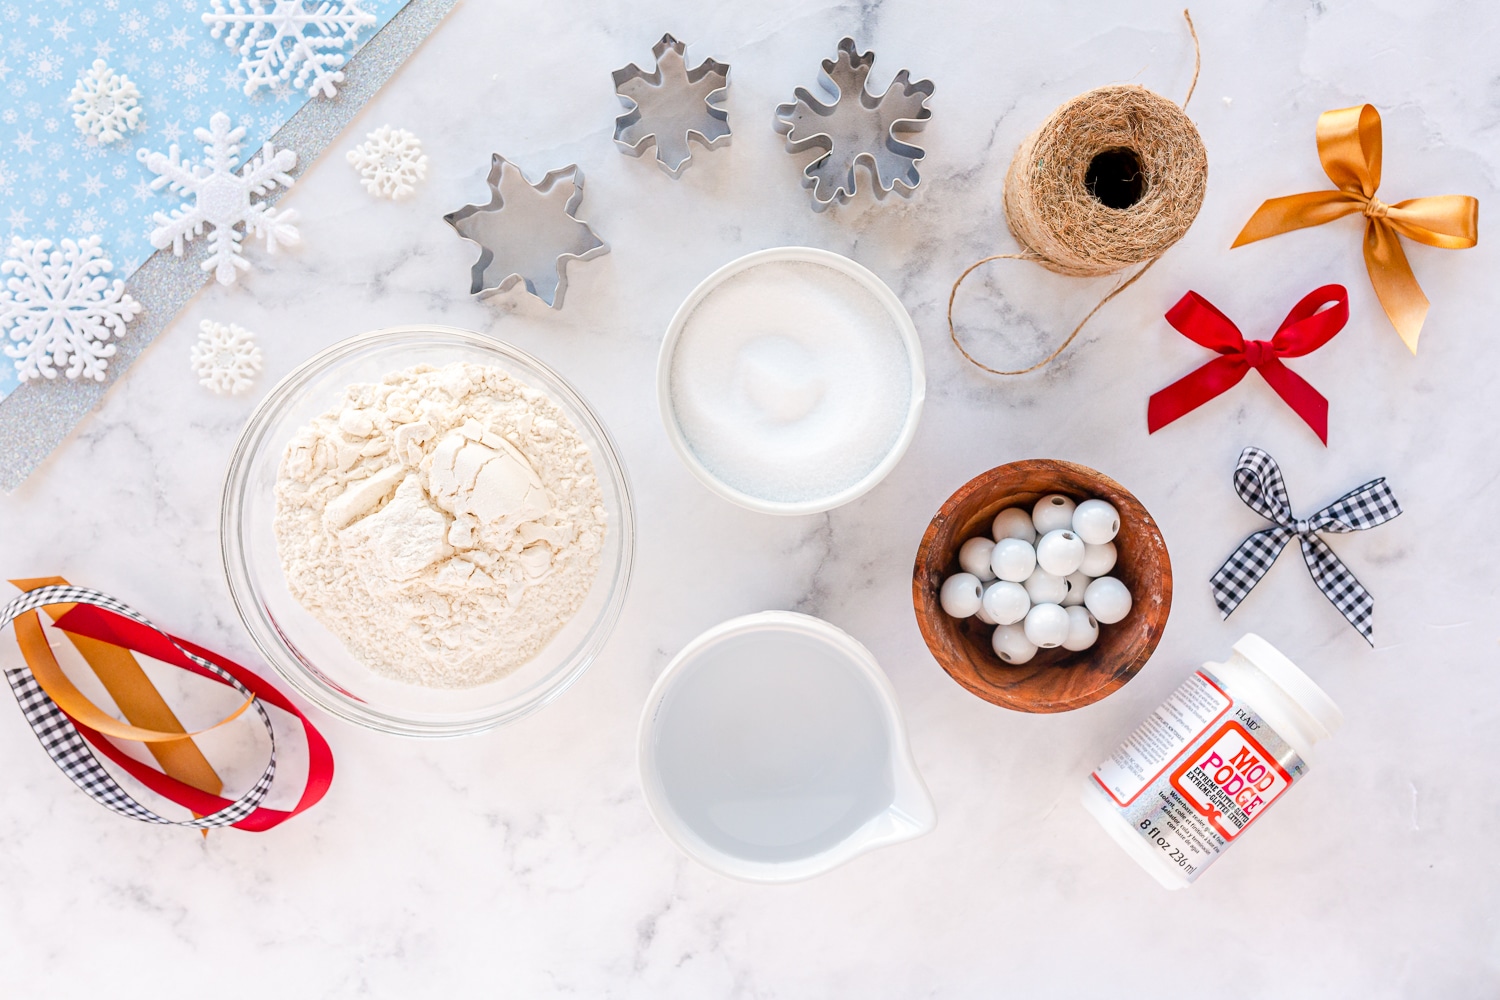 supplies needed for snowflake ornaments